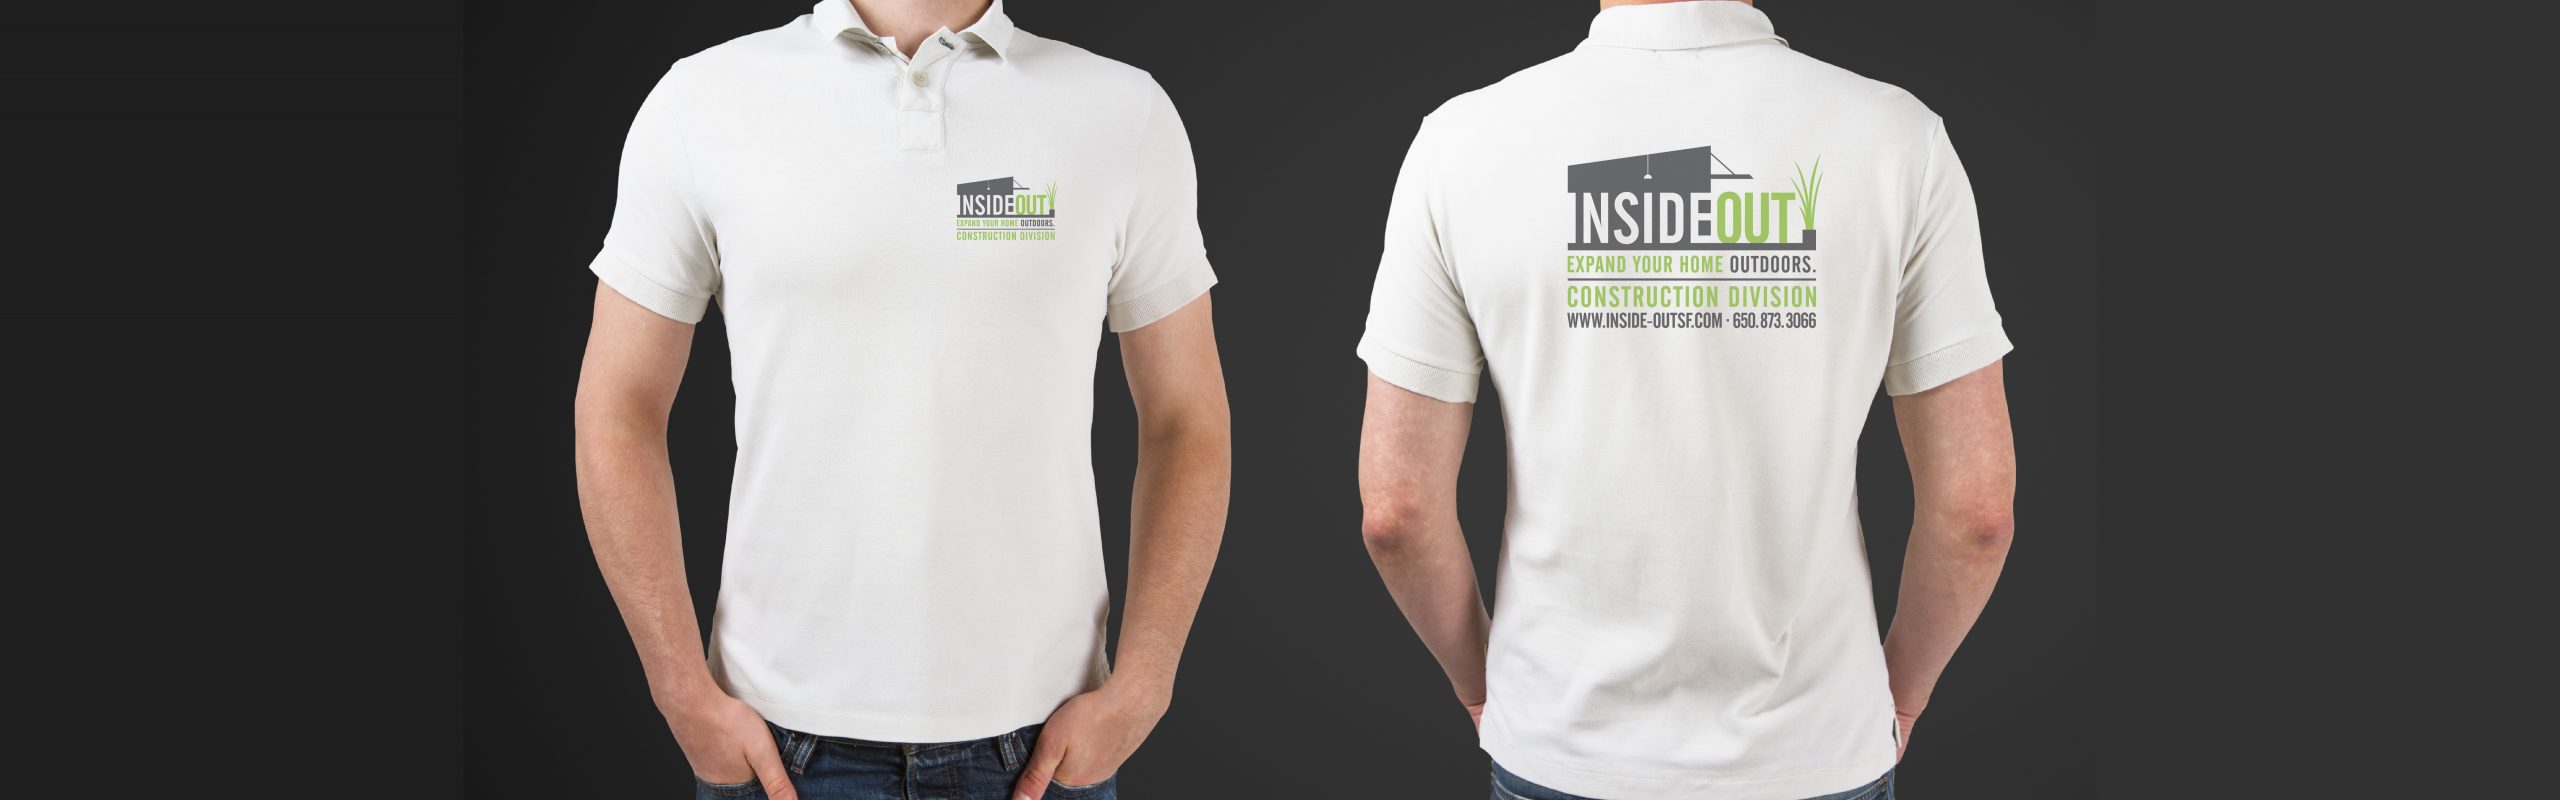 Two mockup images showing the inside out front and back of a white polo shirt with green and black logo designs.